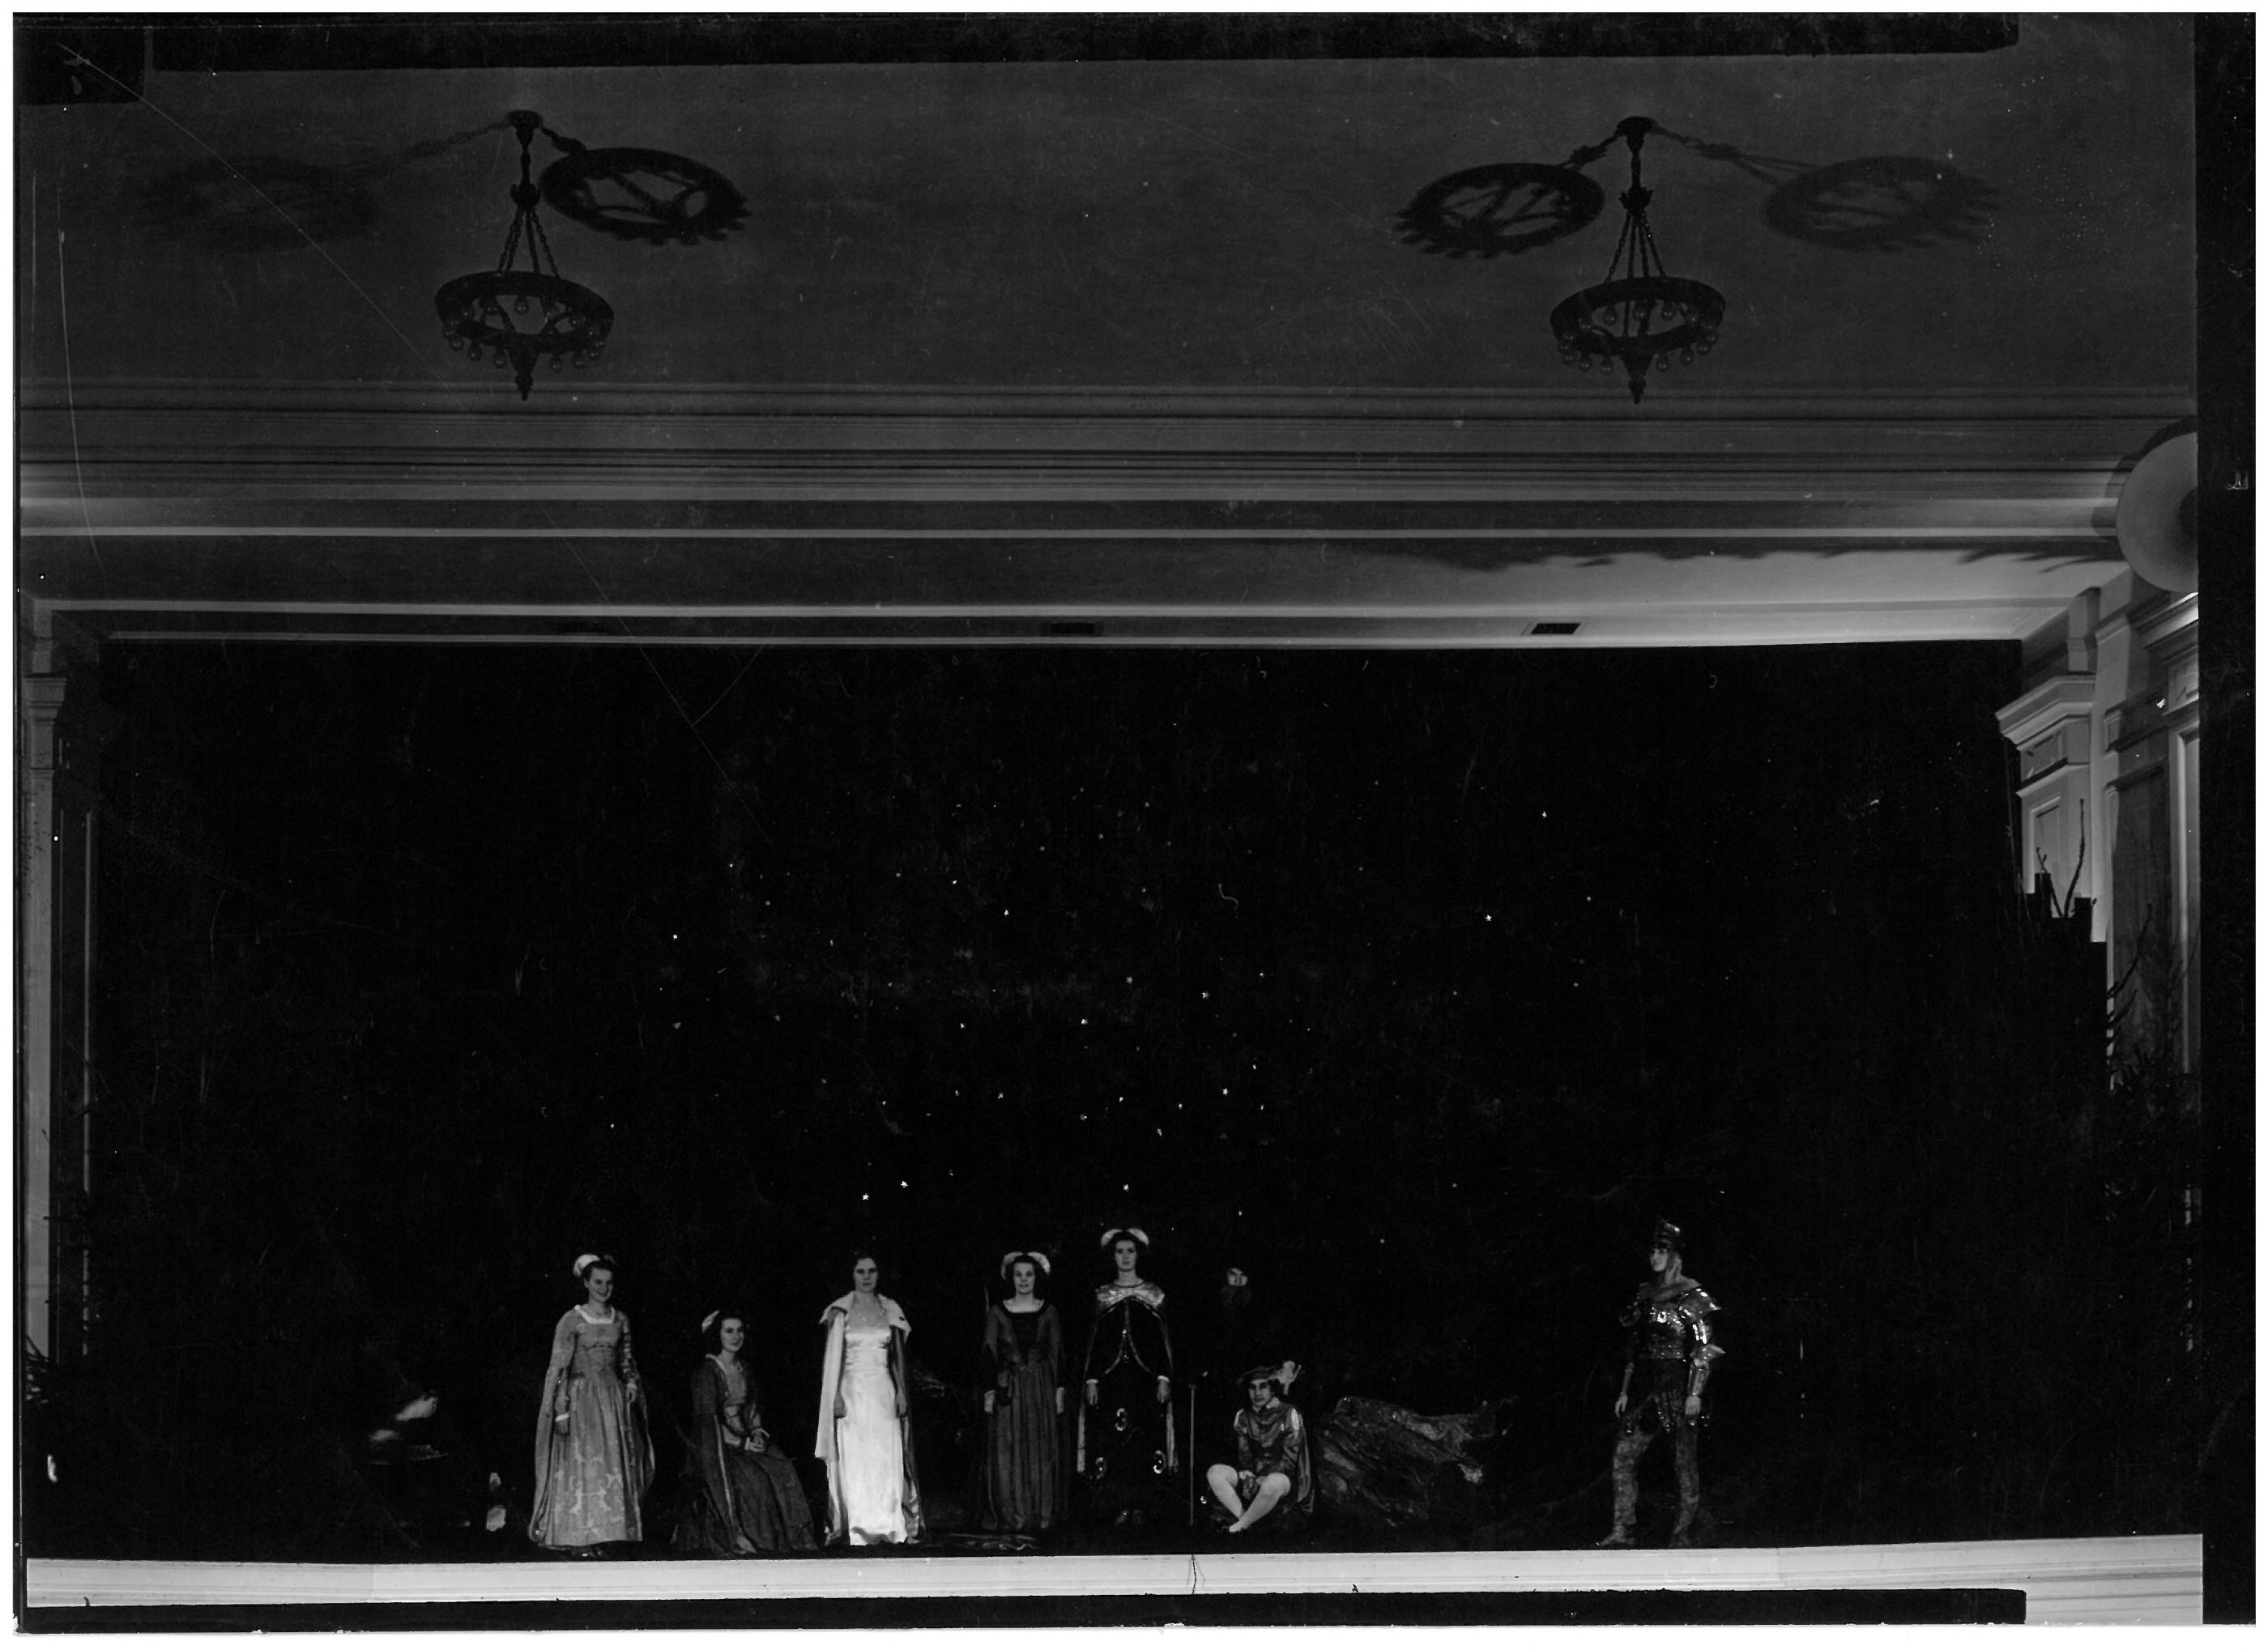 Wheaton College IL Arena Theater Stage Production in the 1950s